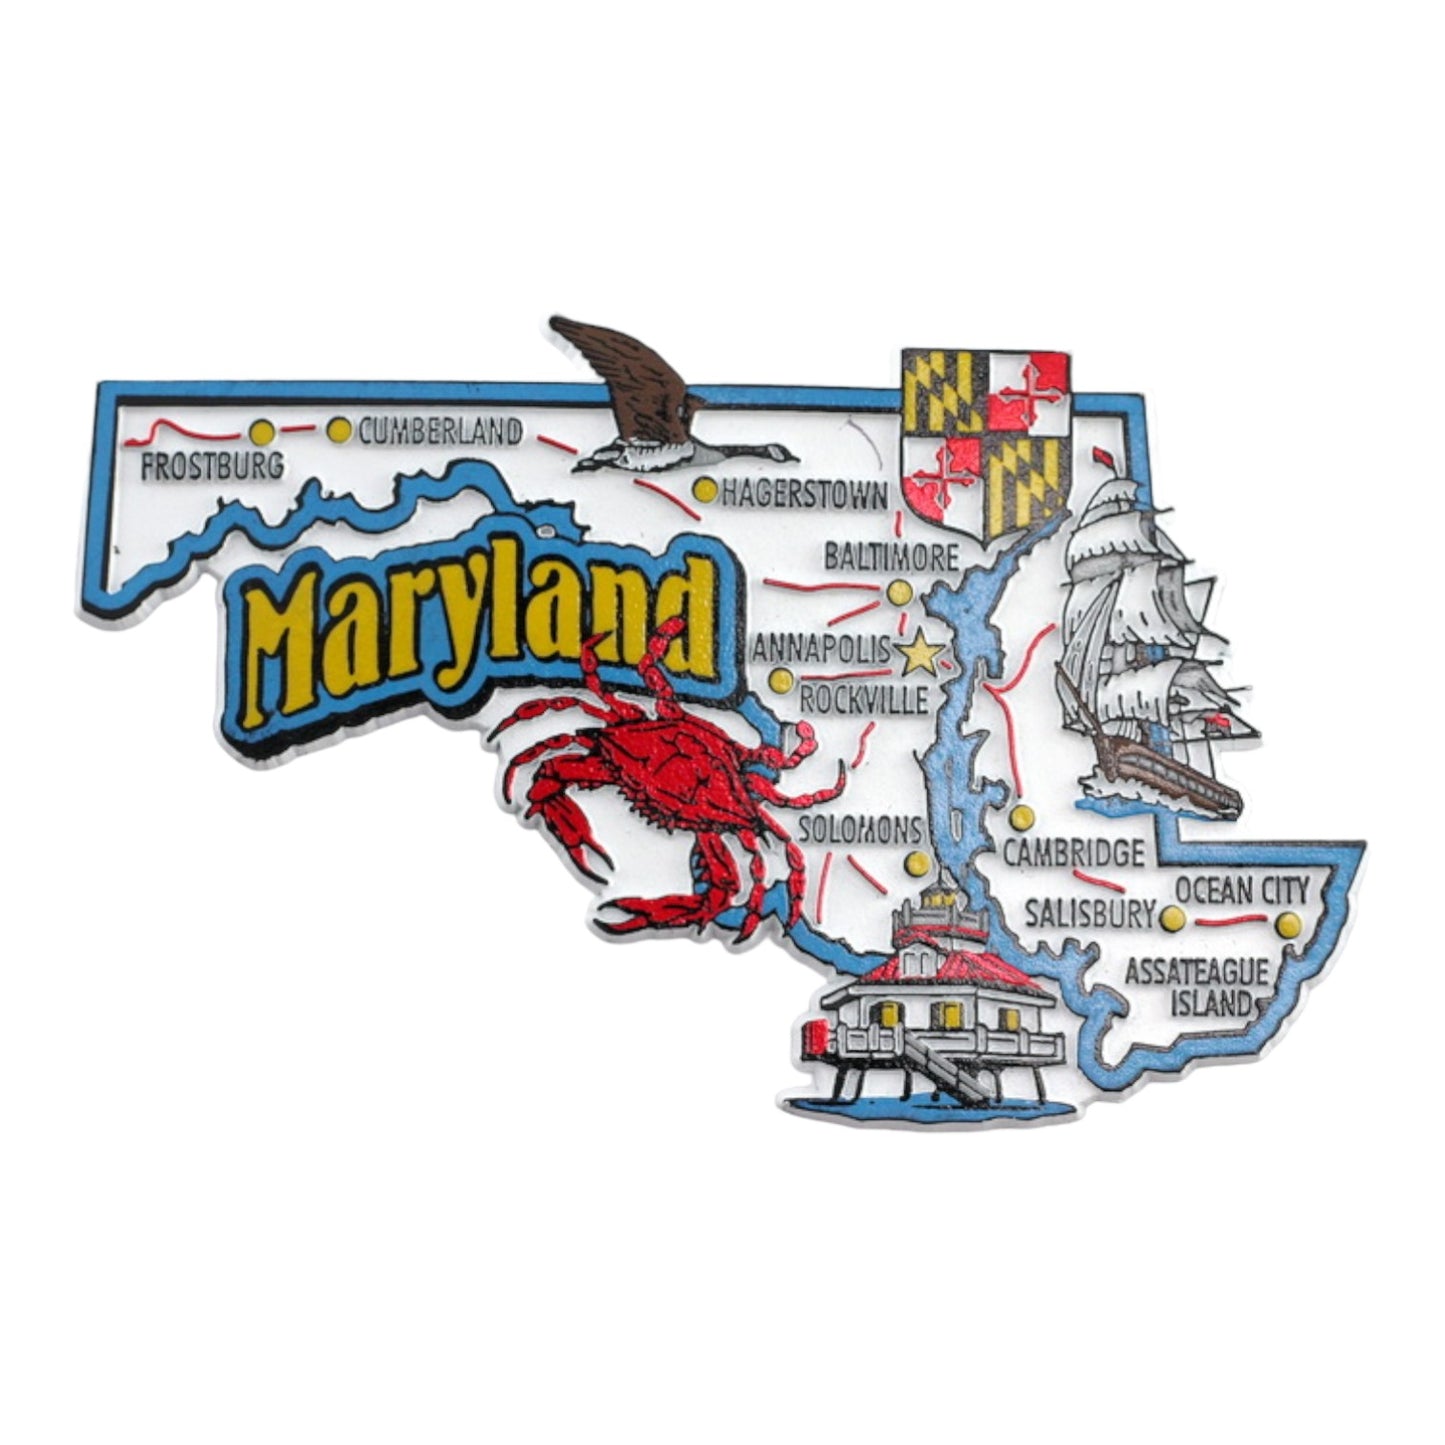 Maryland State Map and Landmarks Collage Fridge Souvenir Collectible Magnet FMC